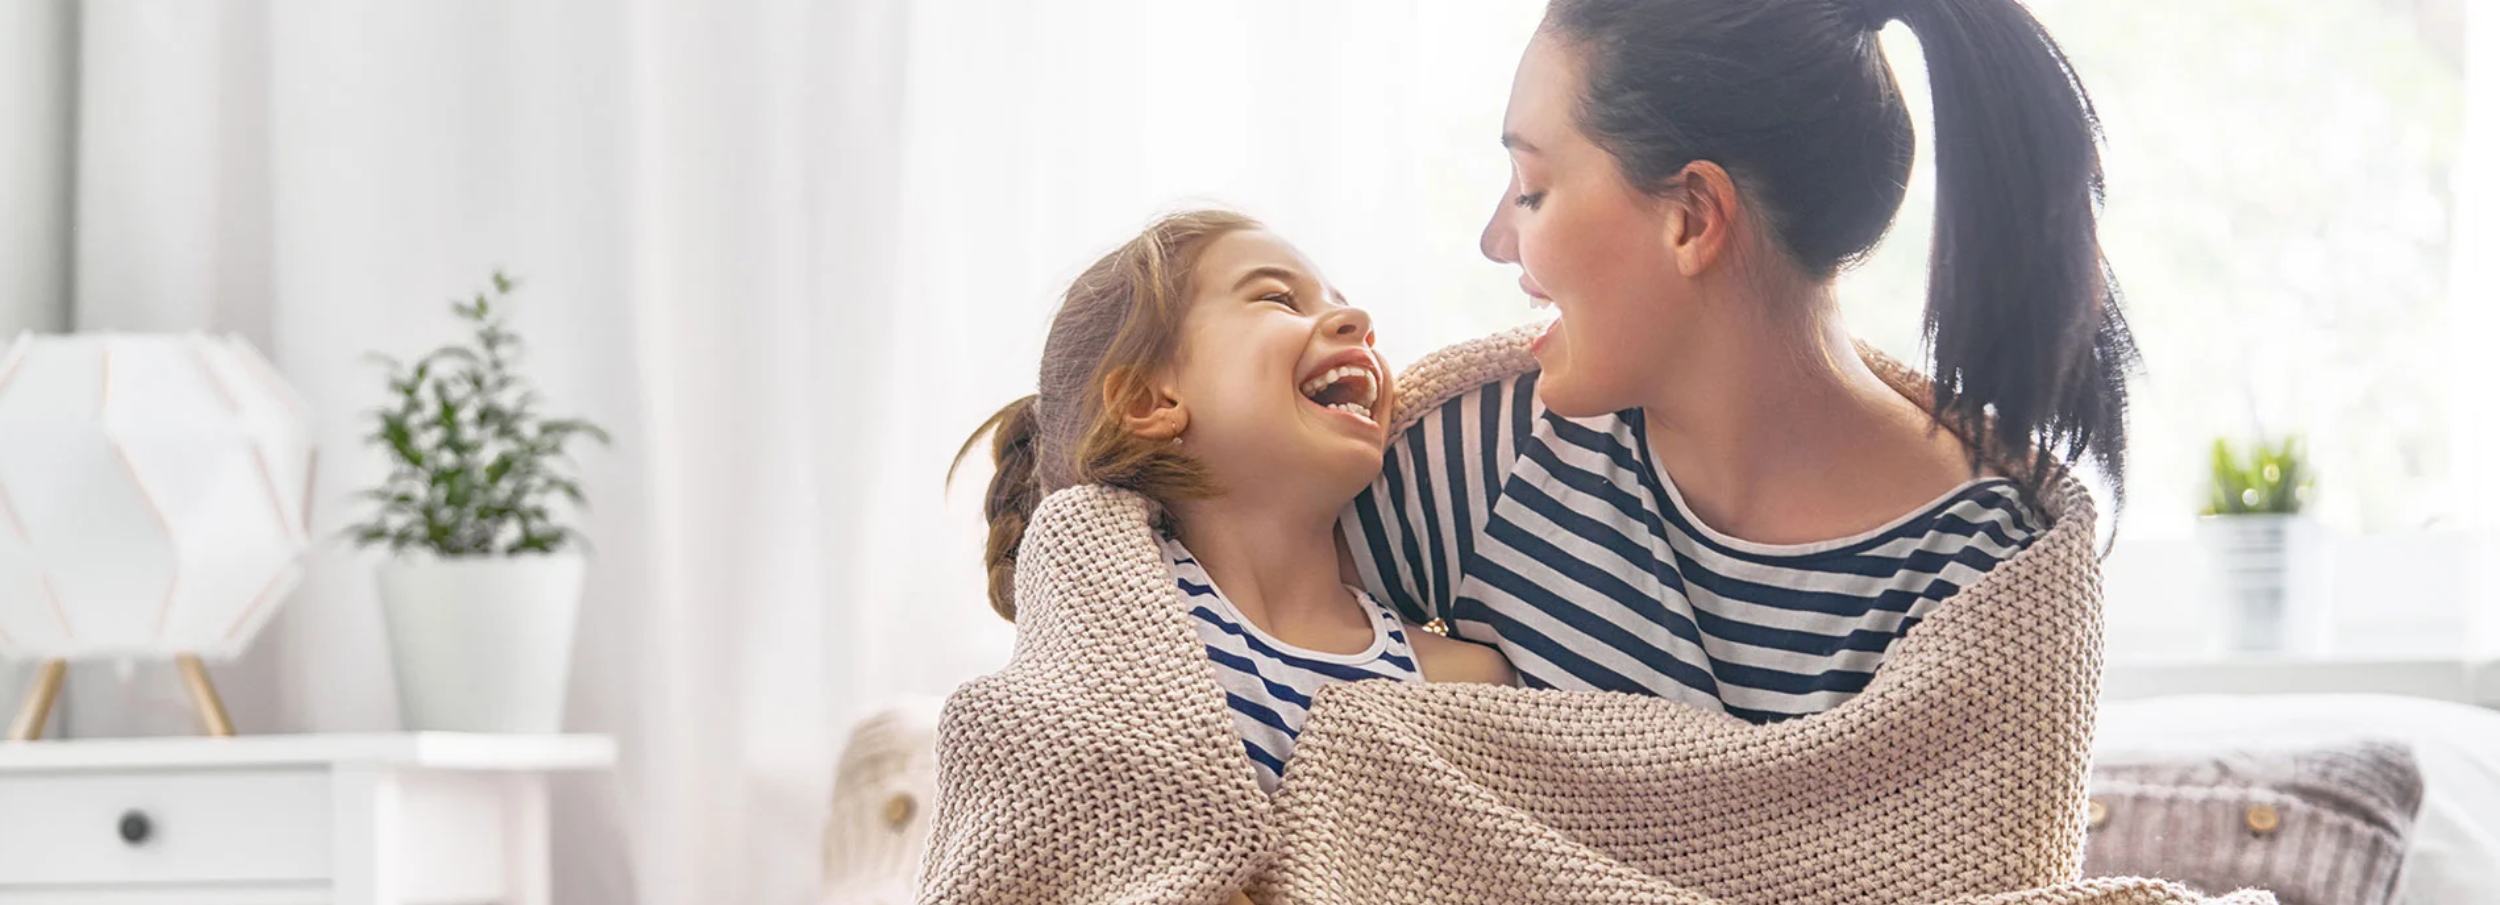 Mother and daughter wrapped in a blanket together laughing.